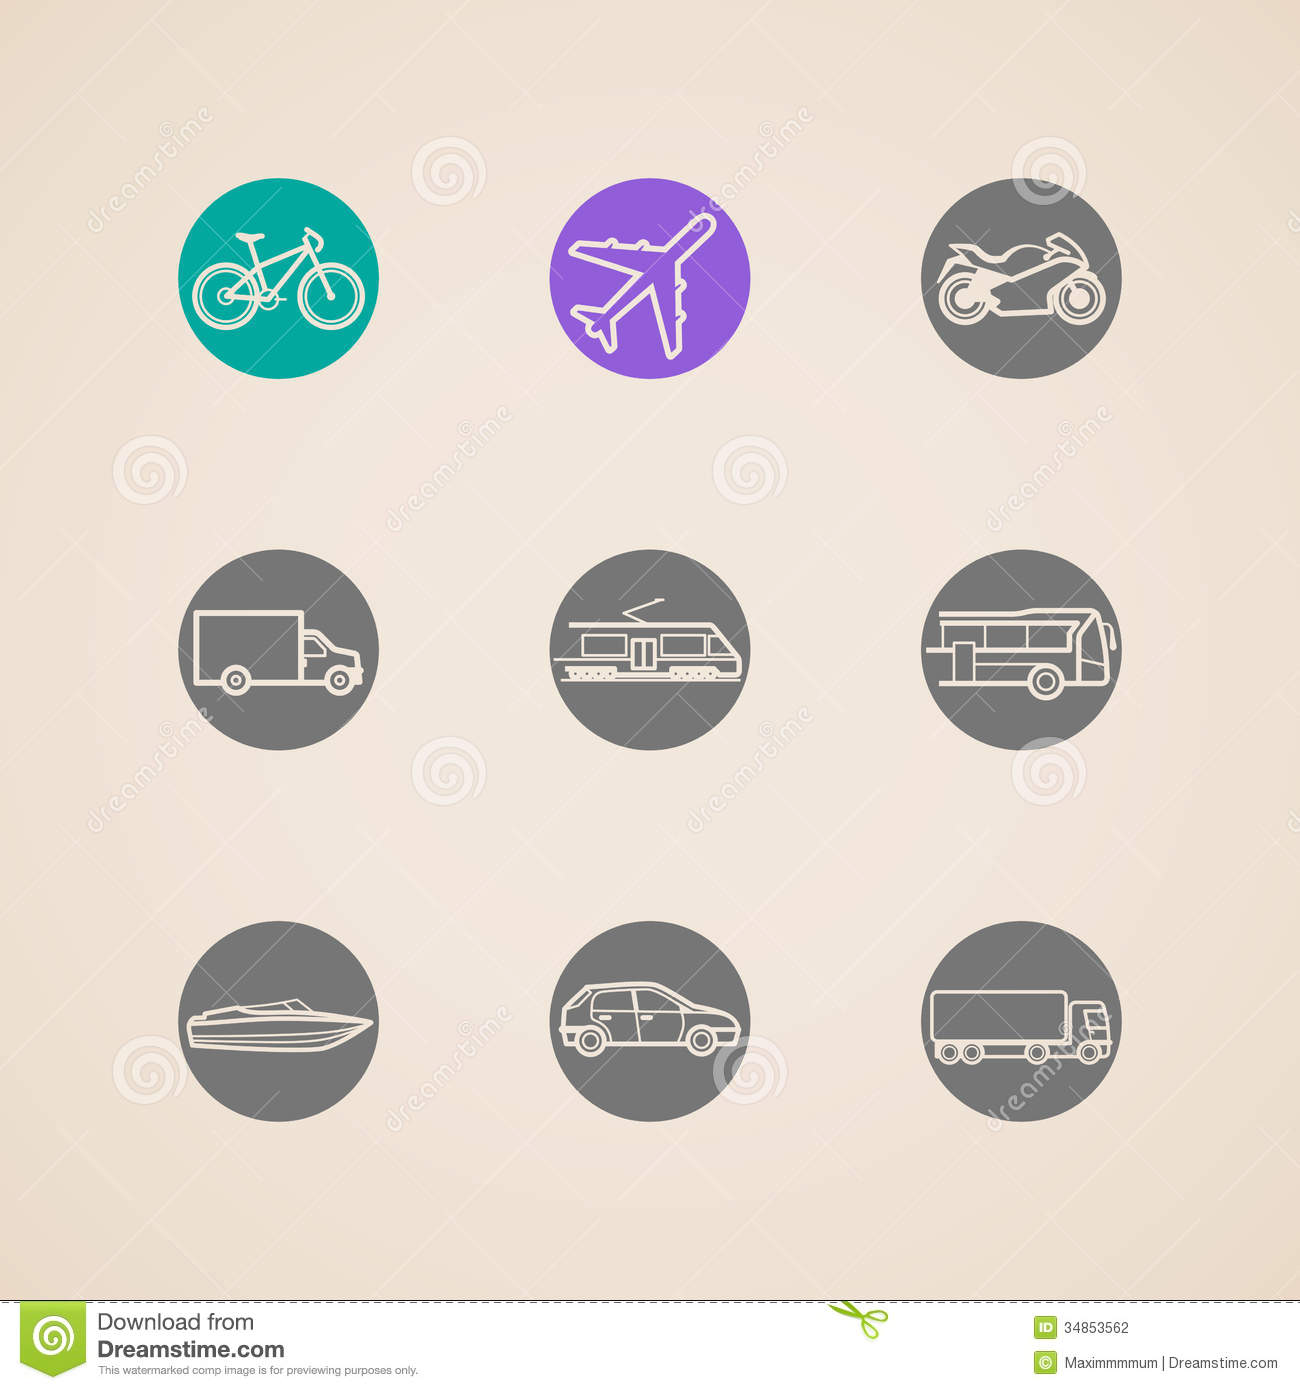 12 Mode Of Transport Icon Images